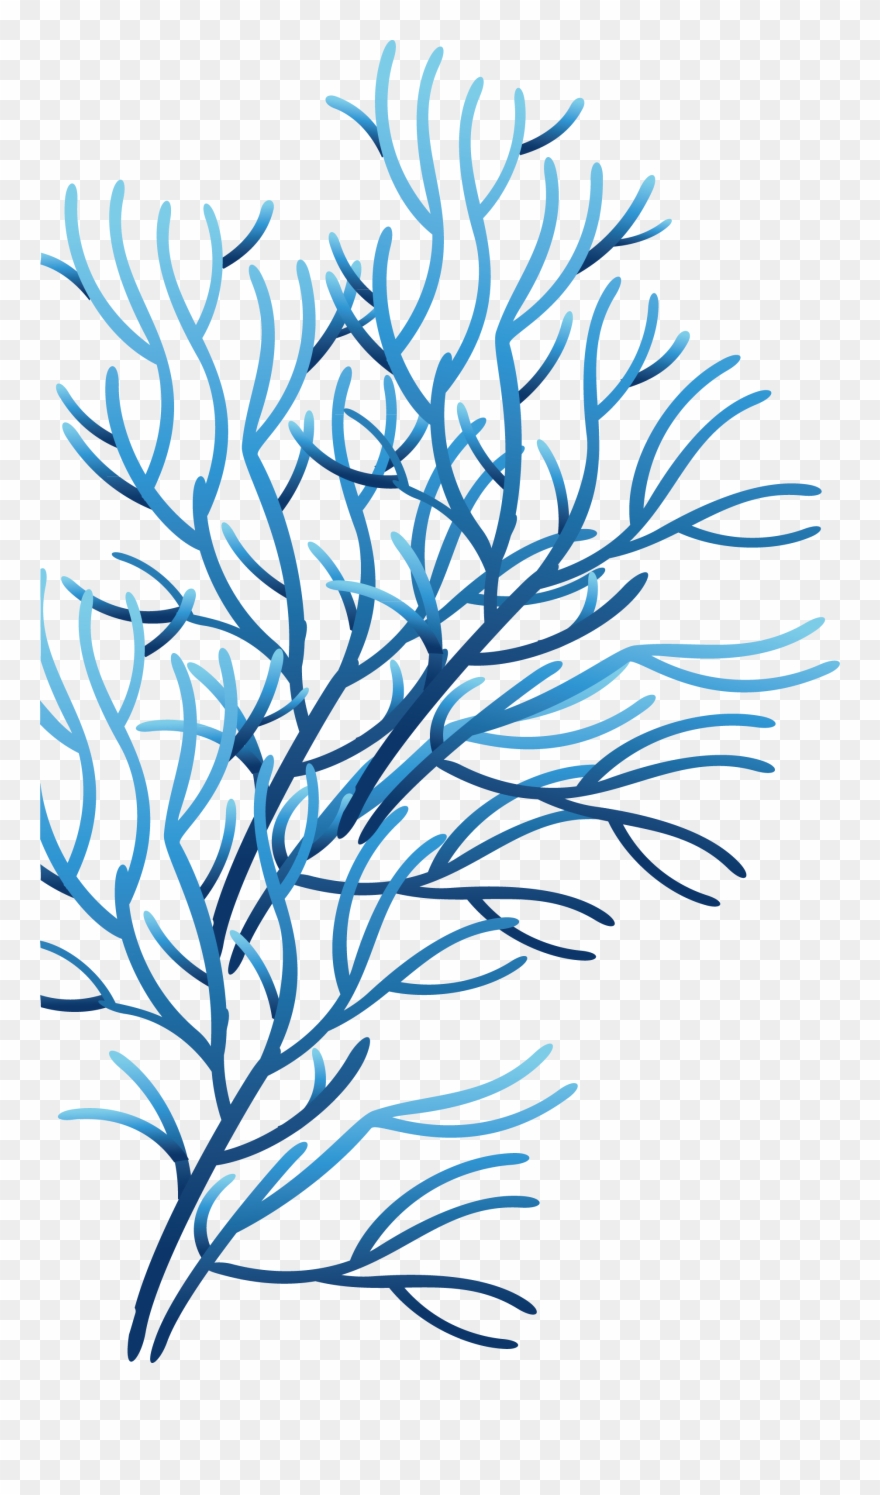 Clipart library coral.